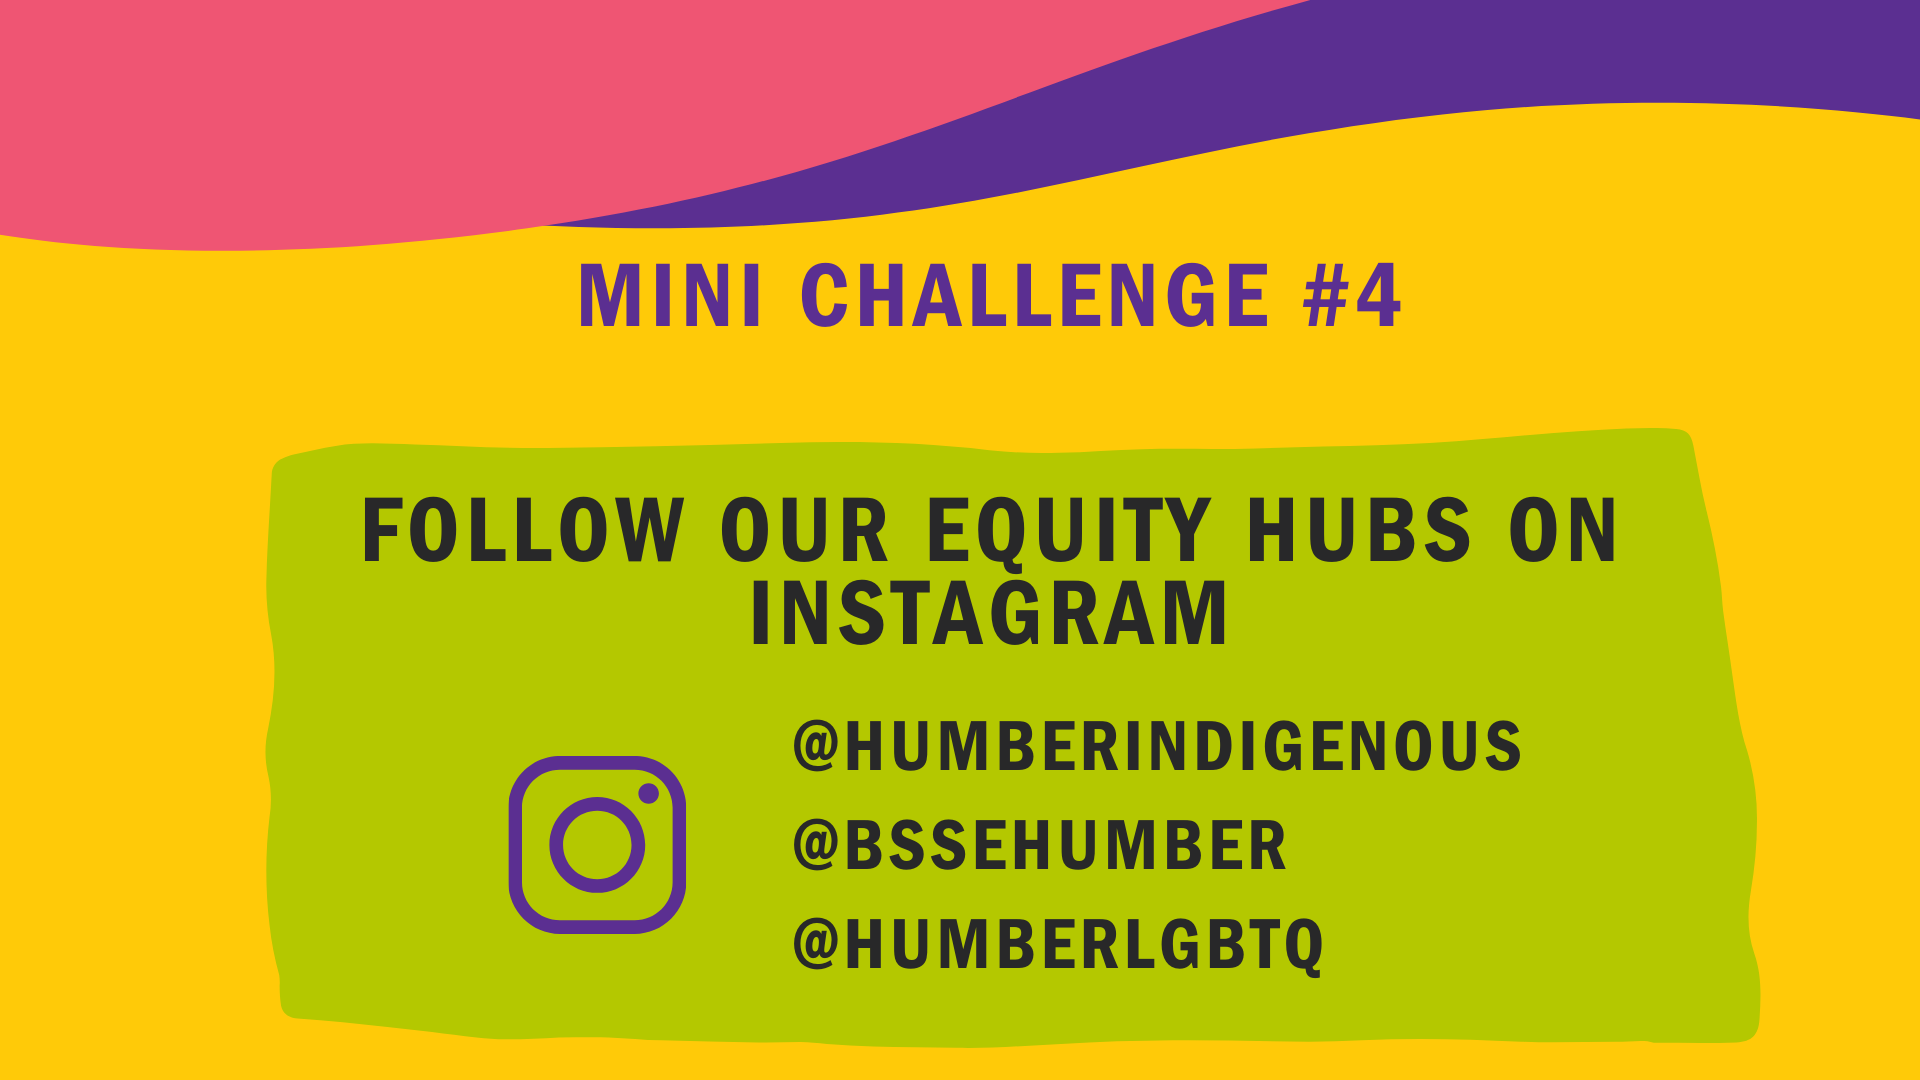 Mini Challenge #4: Follow our Equity Hubs on Instagram @humberindigenous @bssehumber @humberlgbtq